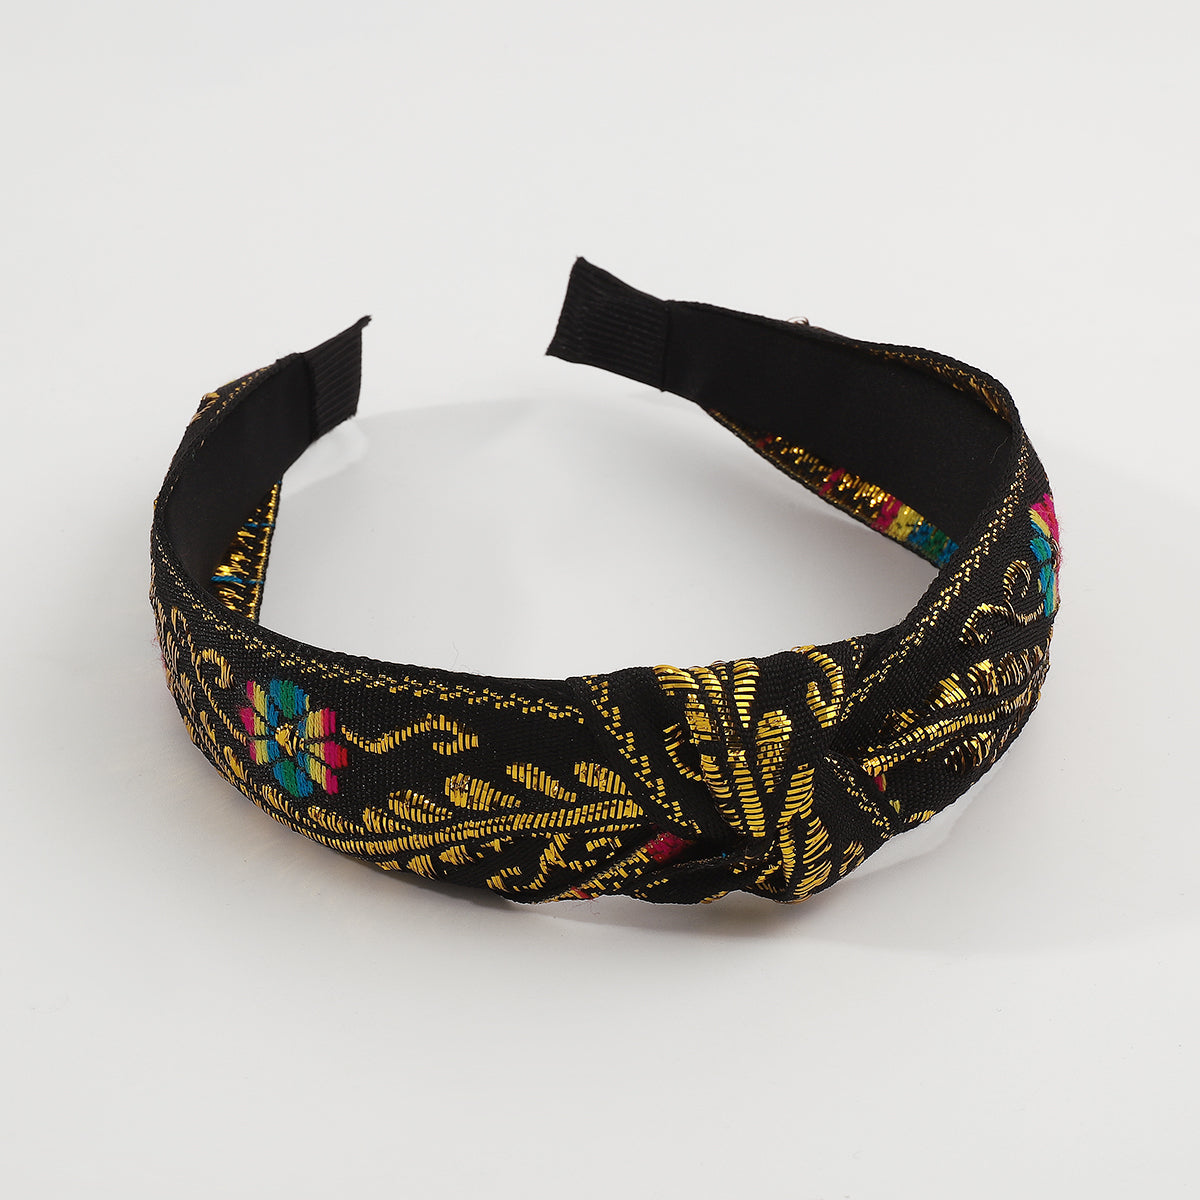 Ethnic Gold Embroidery Floral Knotted Headband medyjewelry